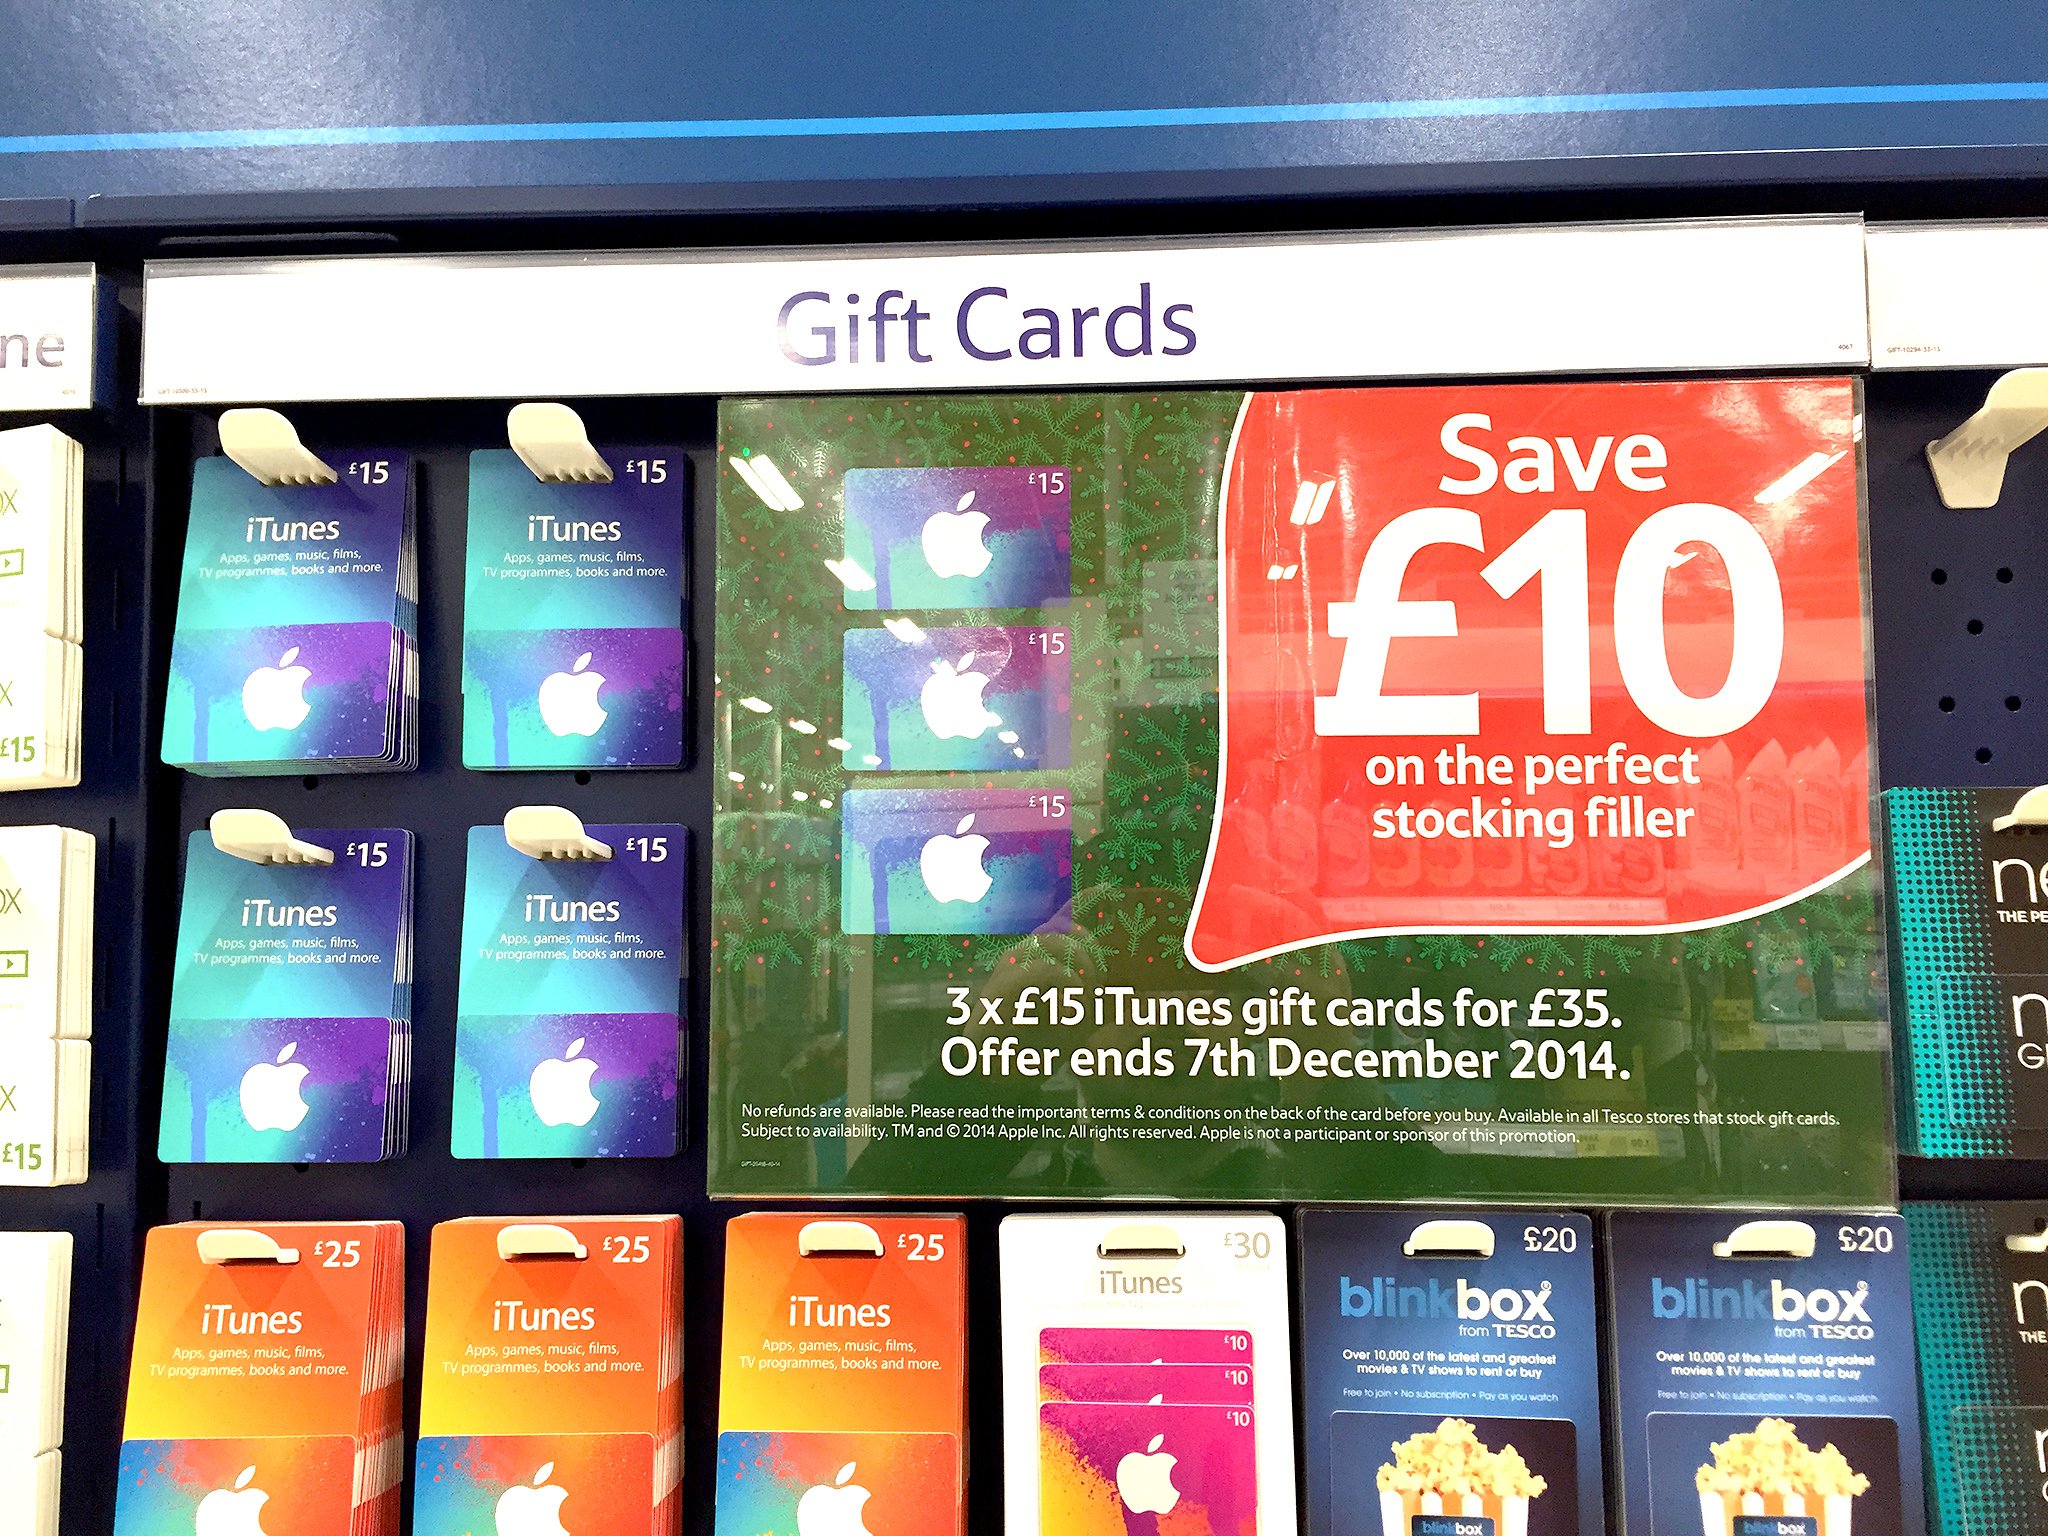 Grab £45 worth of iTunes gift cards for £35 at Tesco iMore